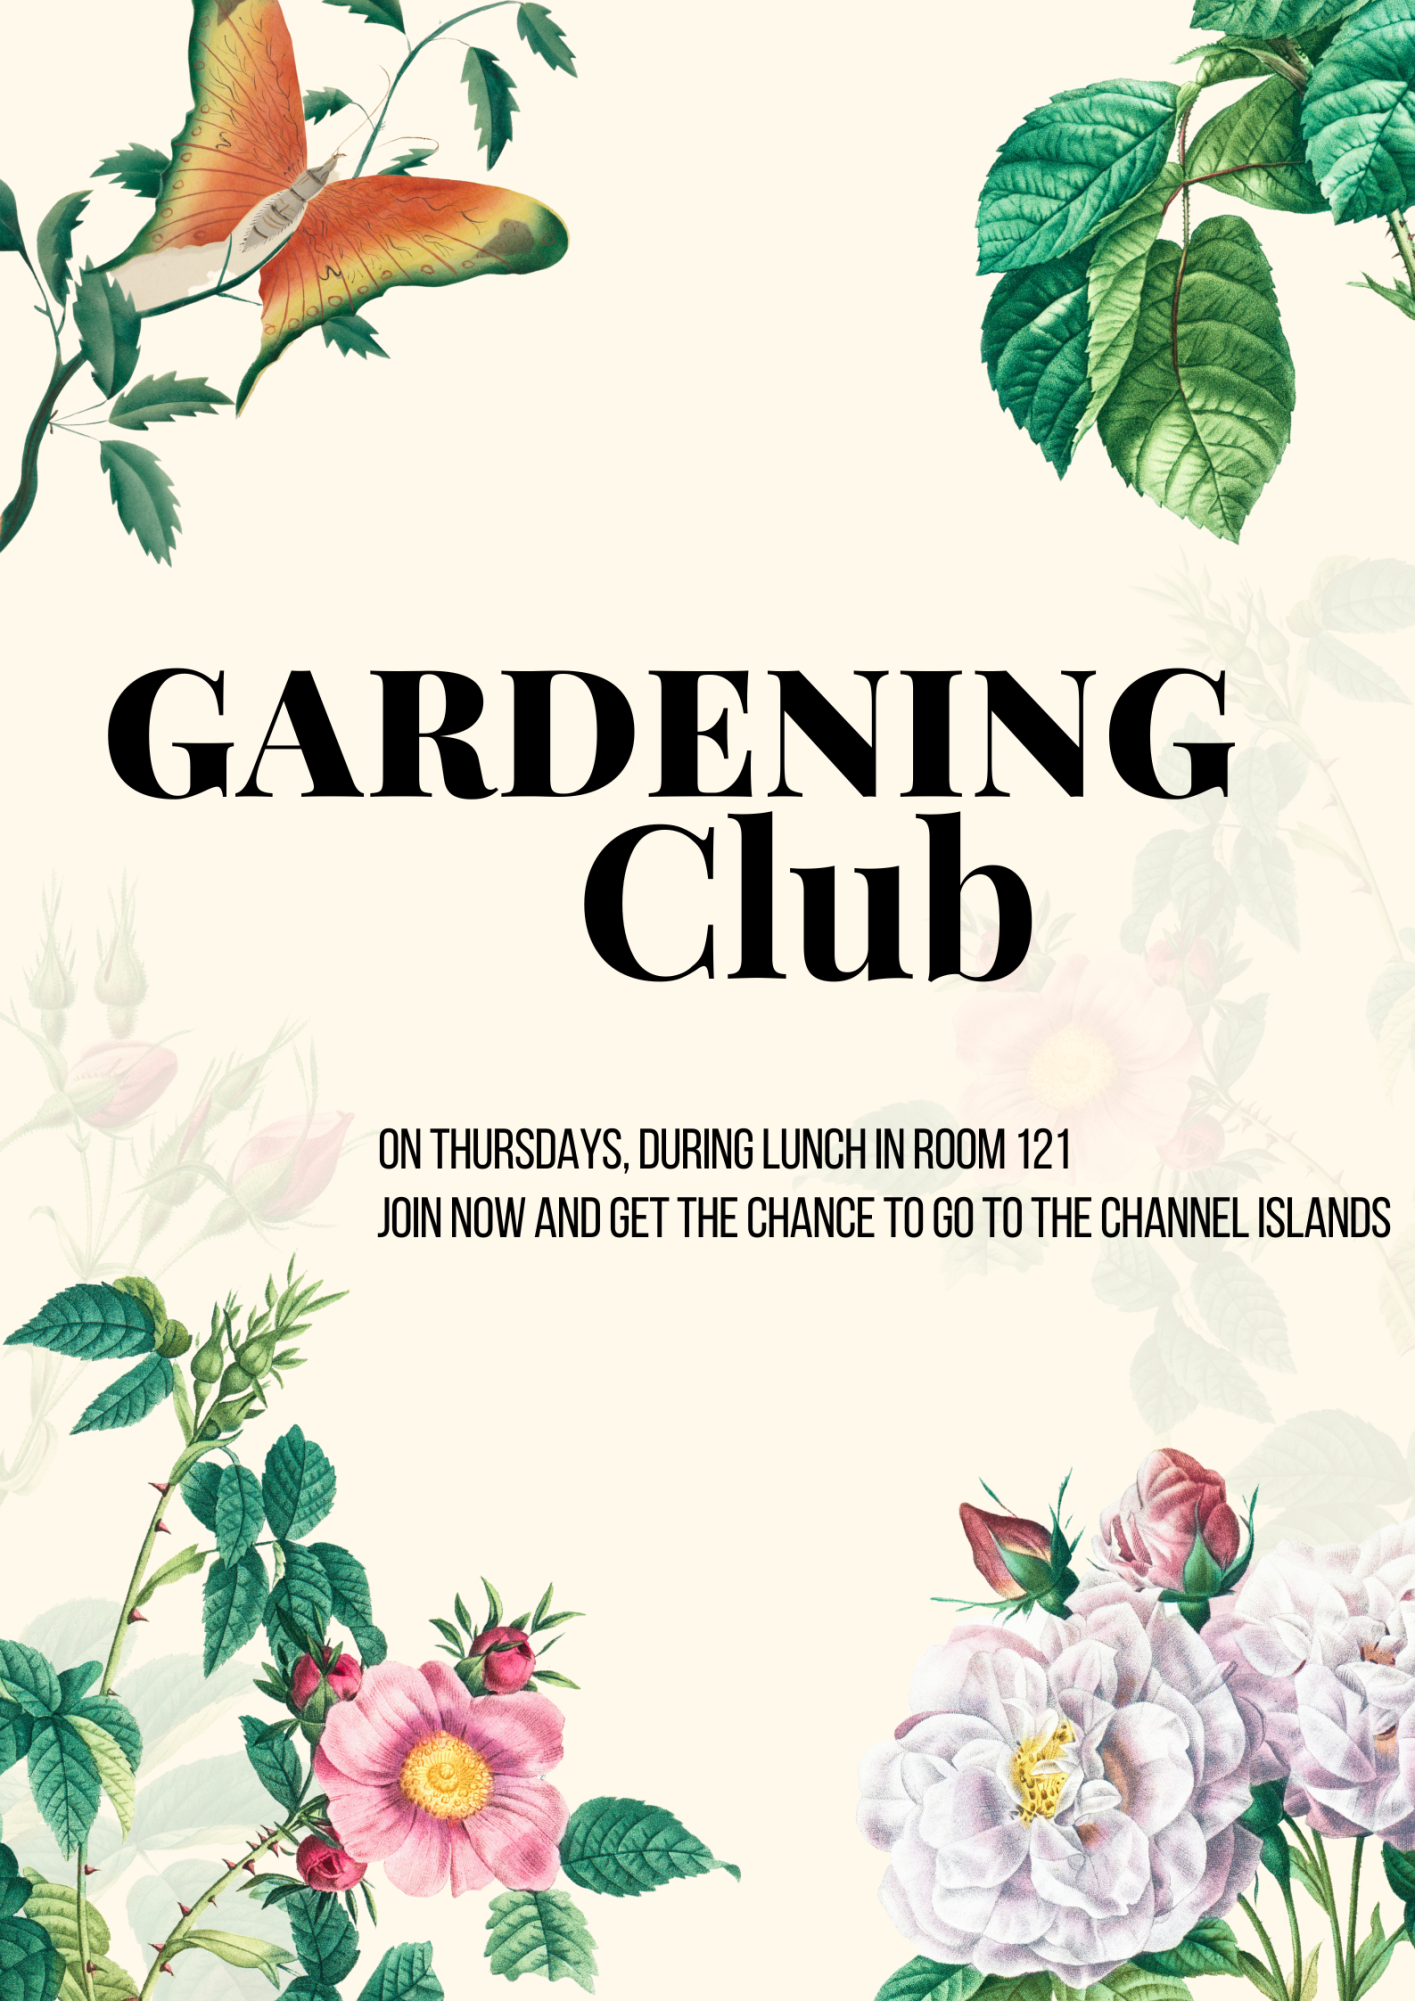 The Gardening Club is cool